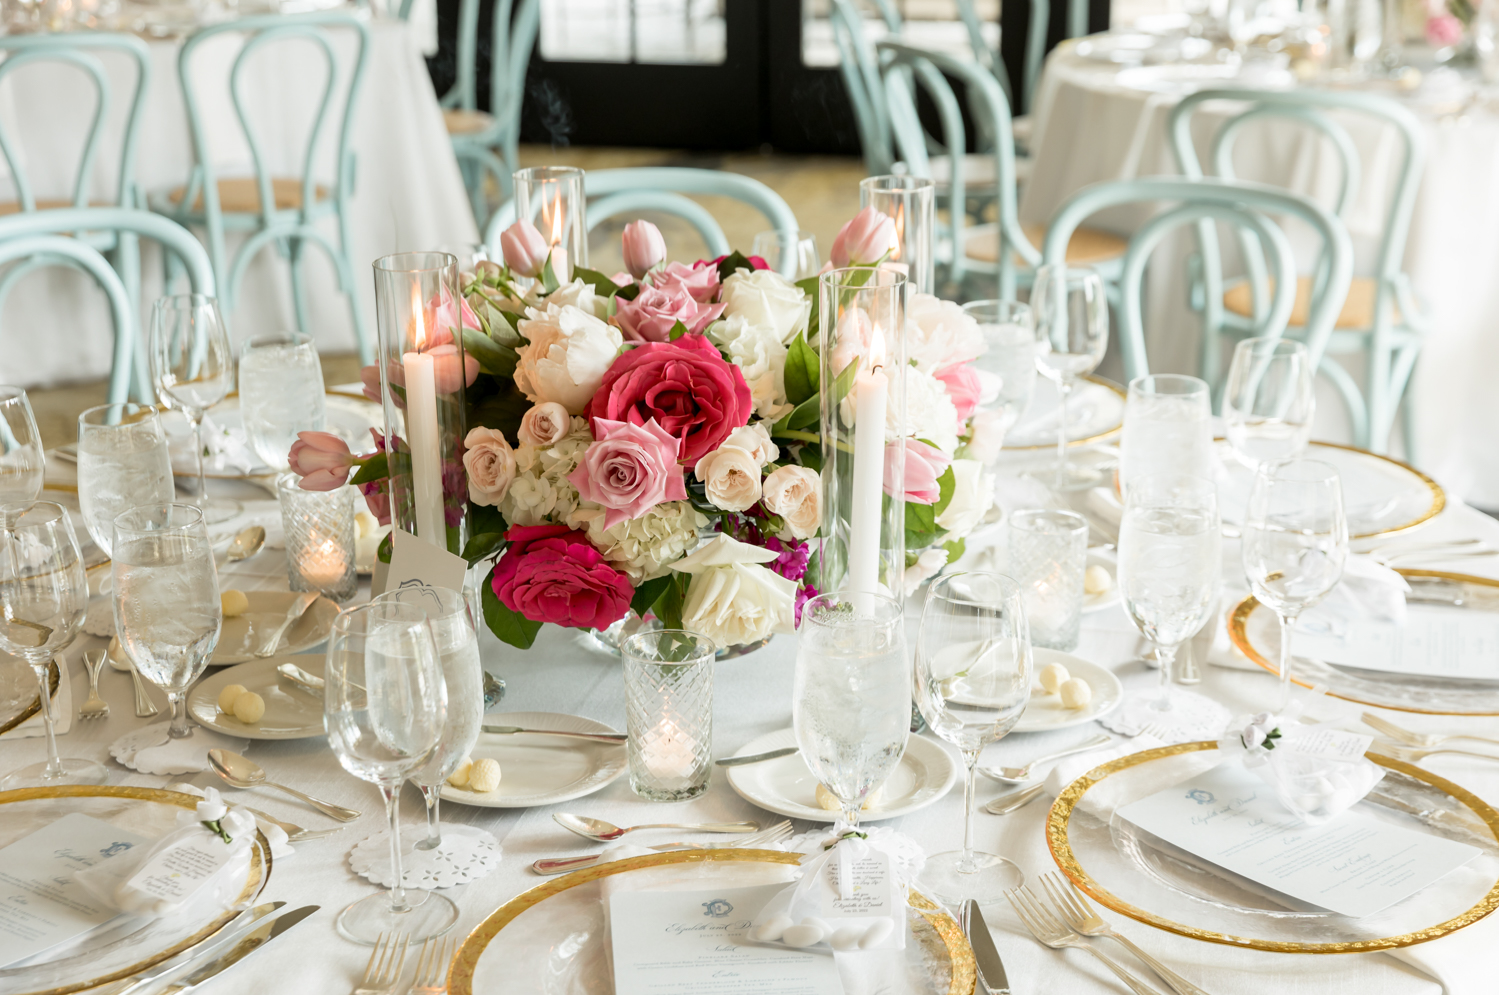 reception table with light blue chairs and pink and white floral centerpiece 